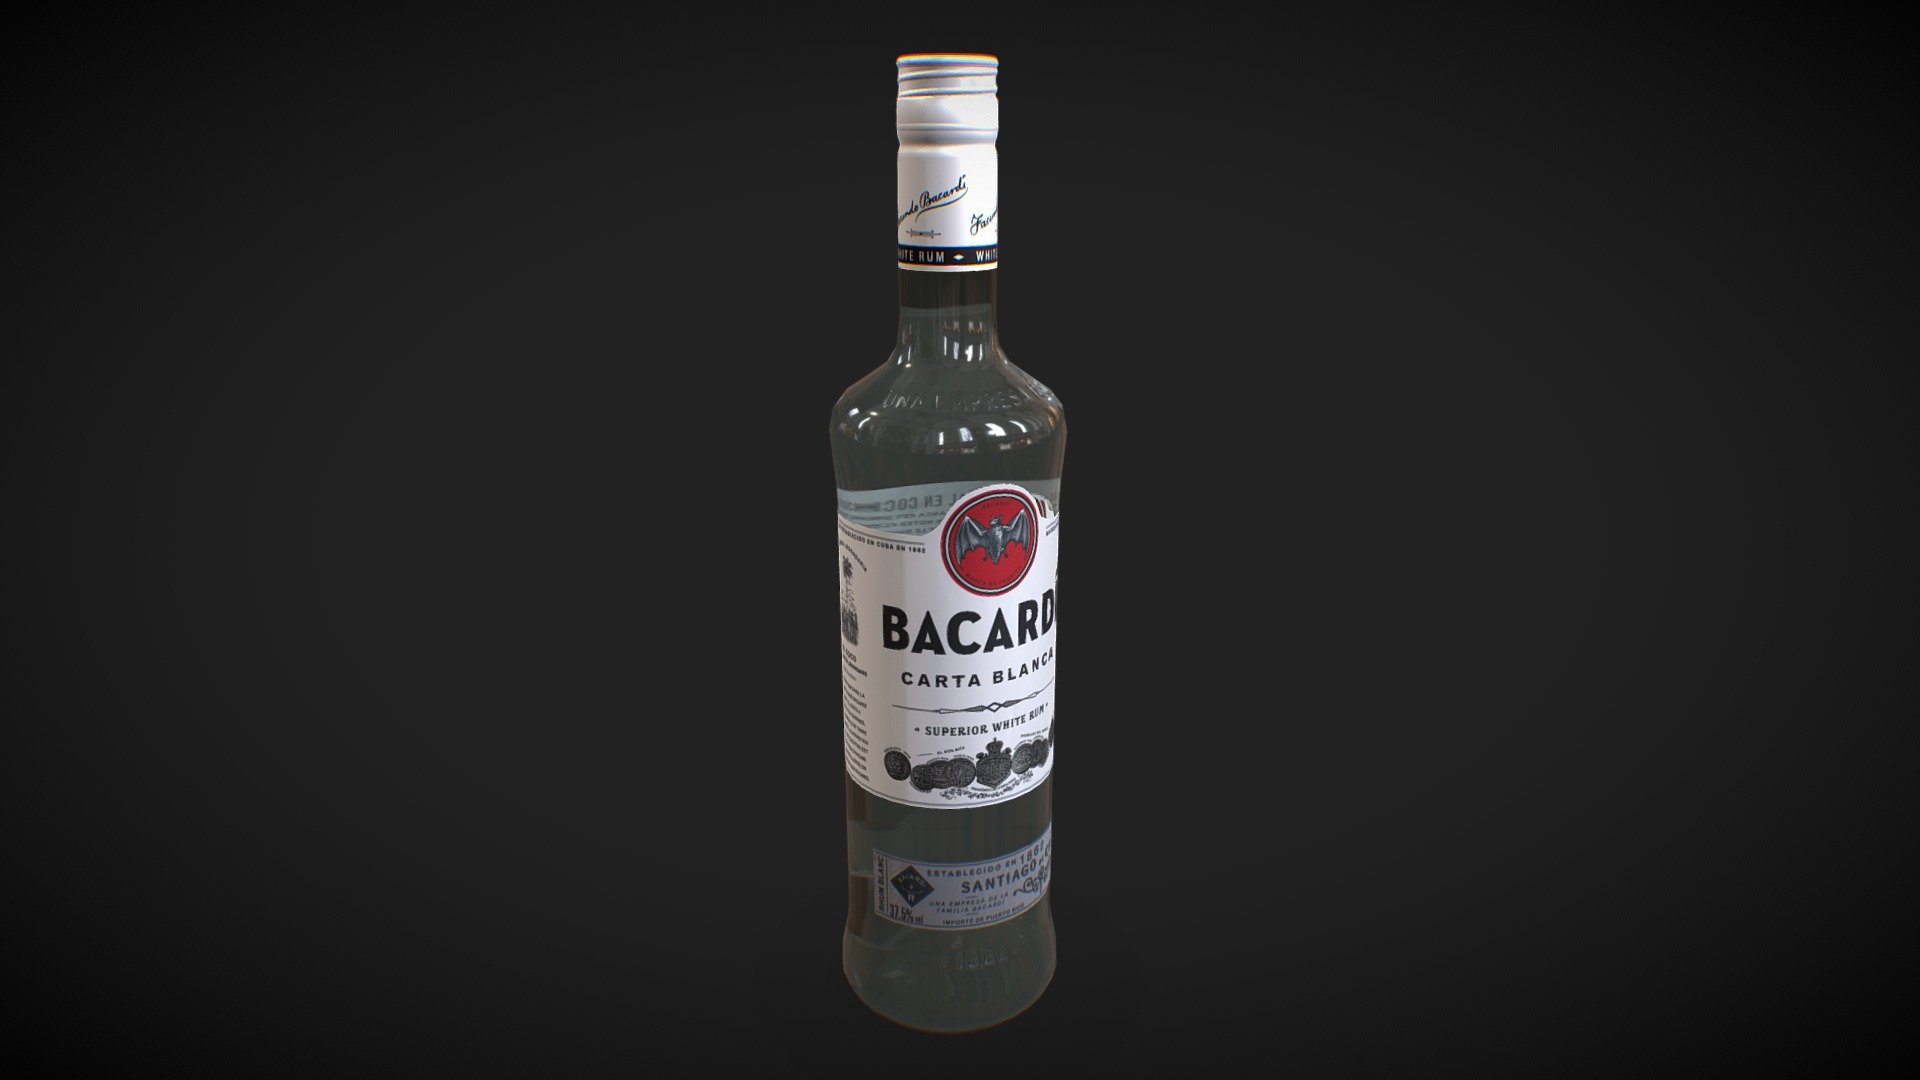 Make way for the Bacardi Carta Blanca bottle, a famous brand in the Mixology field, created in Cuba in 1862 by Don Facundo whose name can be found on the bottle's ring.
The labels enjoy a beautiful glossy effect and the bottle features many embossments including the iconic Bacardi brand bat on the back.

The story goes that the wife of the brand's founder, Doña Amalia Bacardi, once saw fruit bats (a species of fruit bat sometimes also called &ldquo;flying fox